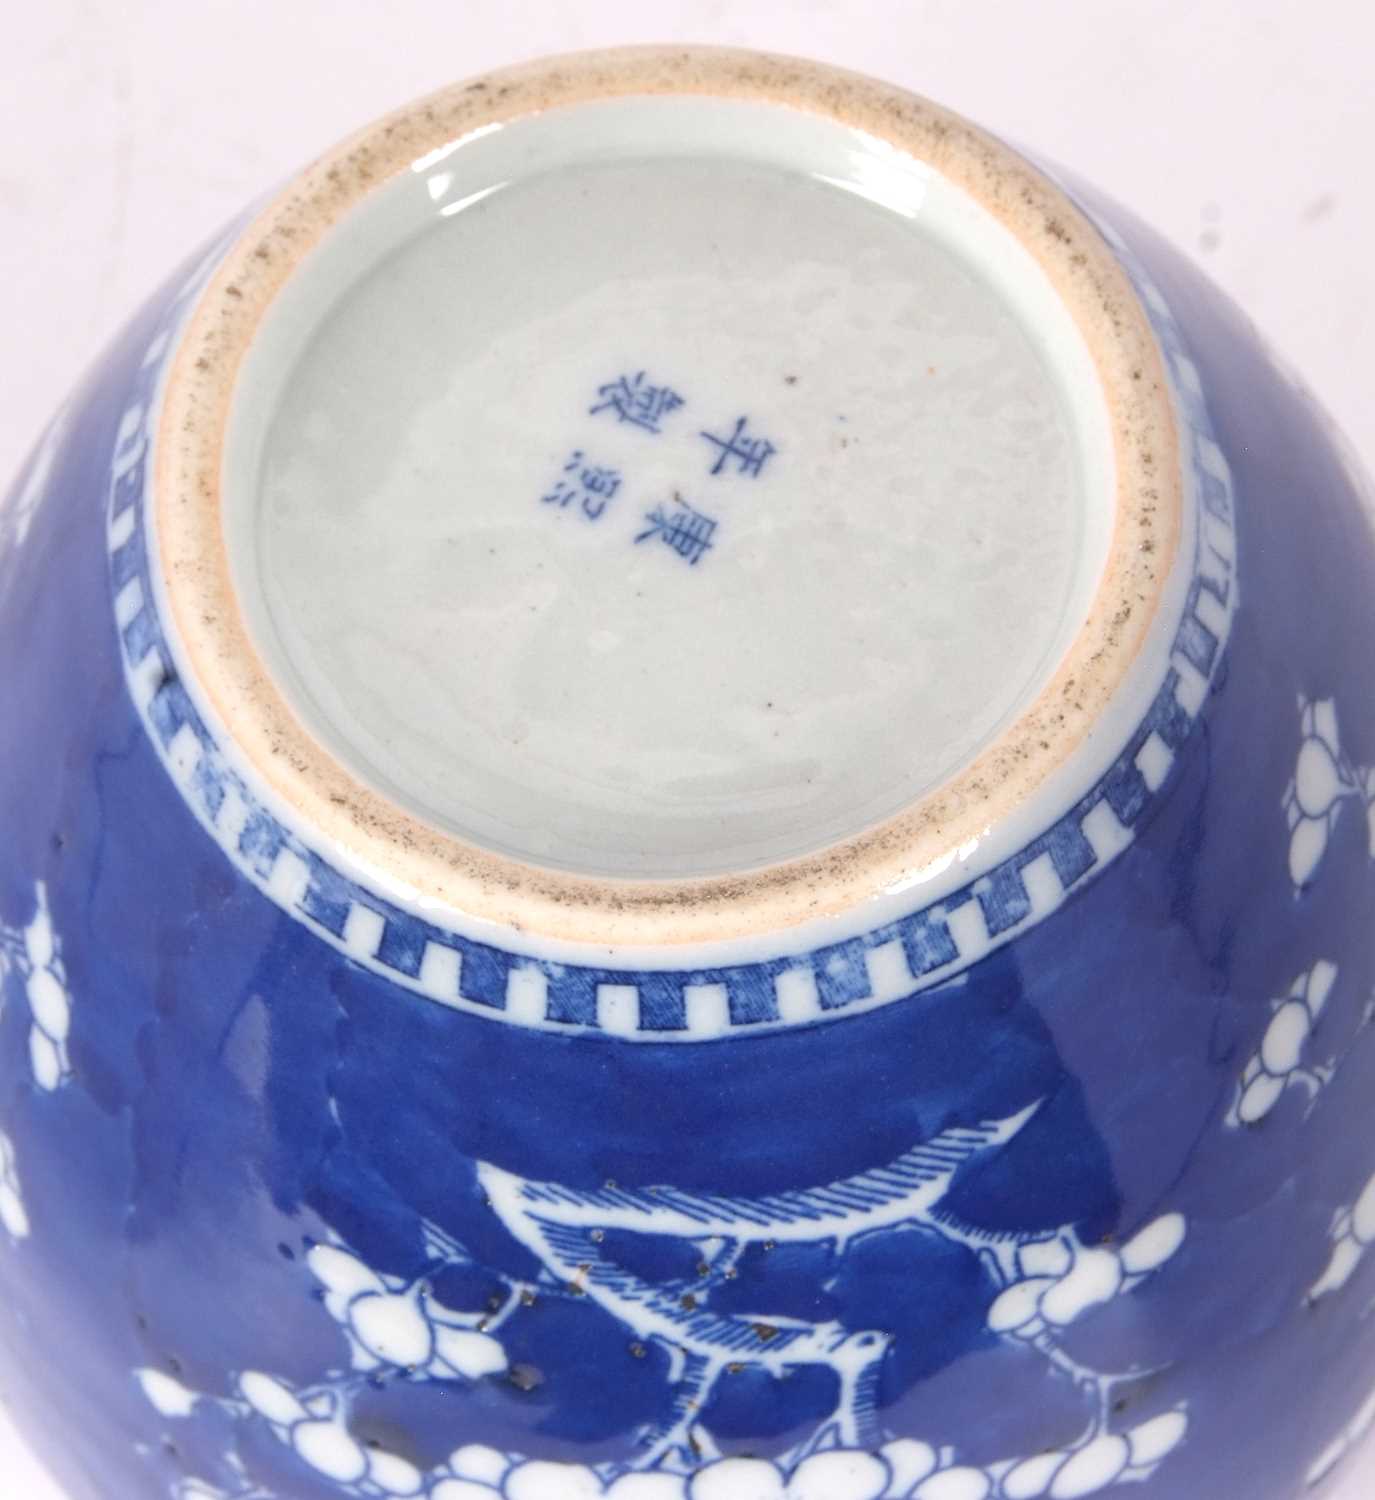 Chinese porcelain ginger jar 19th Century decorated with prunus on a blue ground - Image 5 of 14